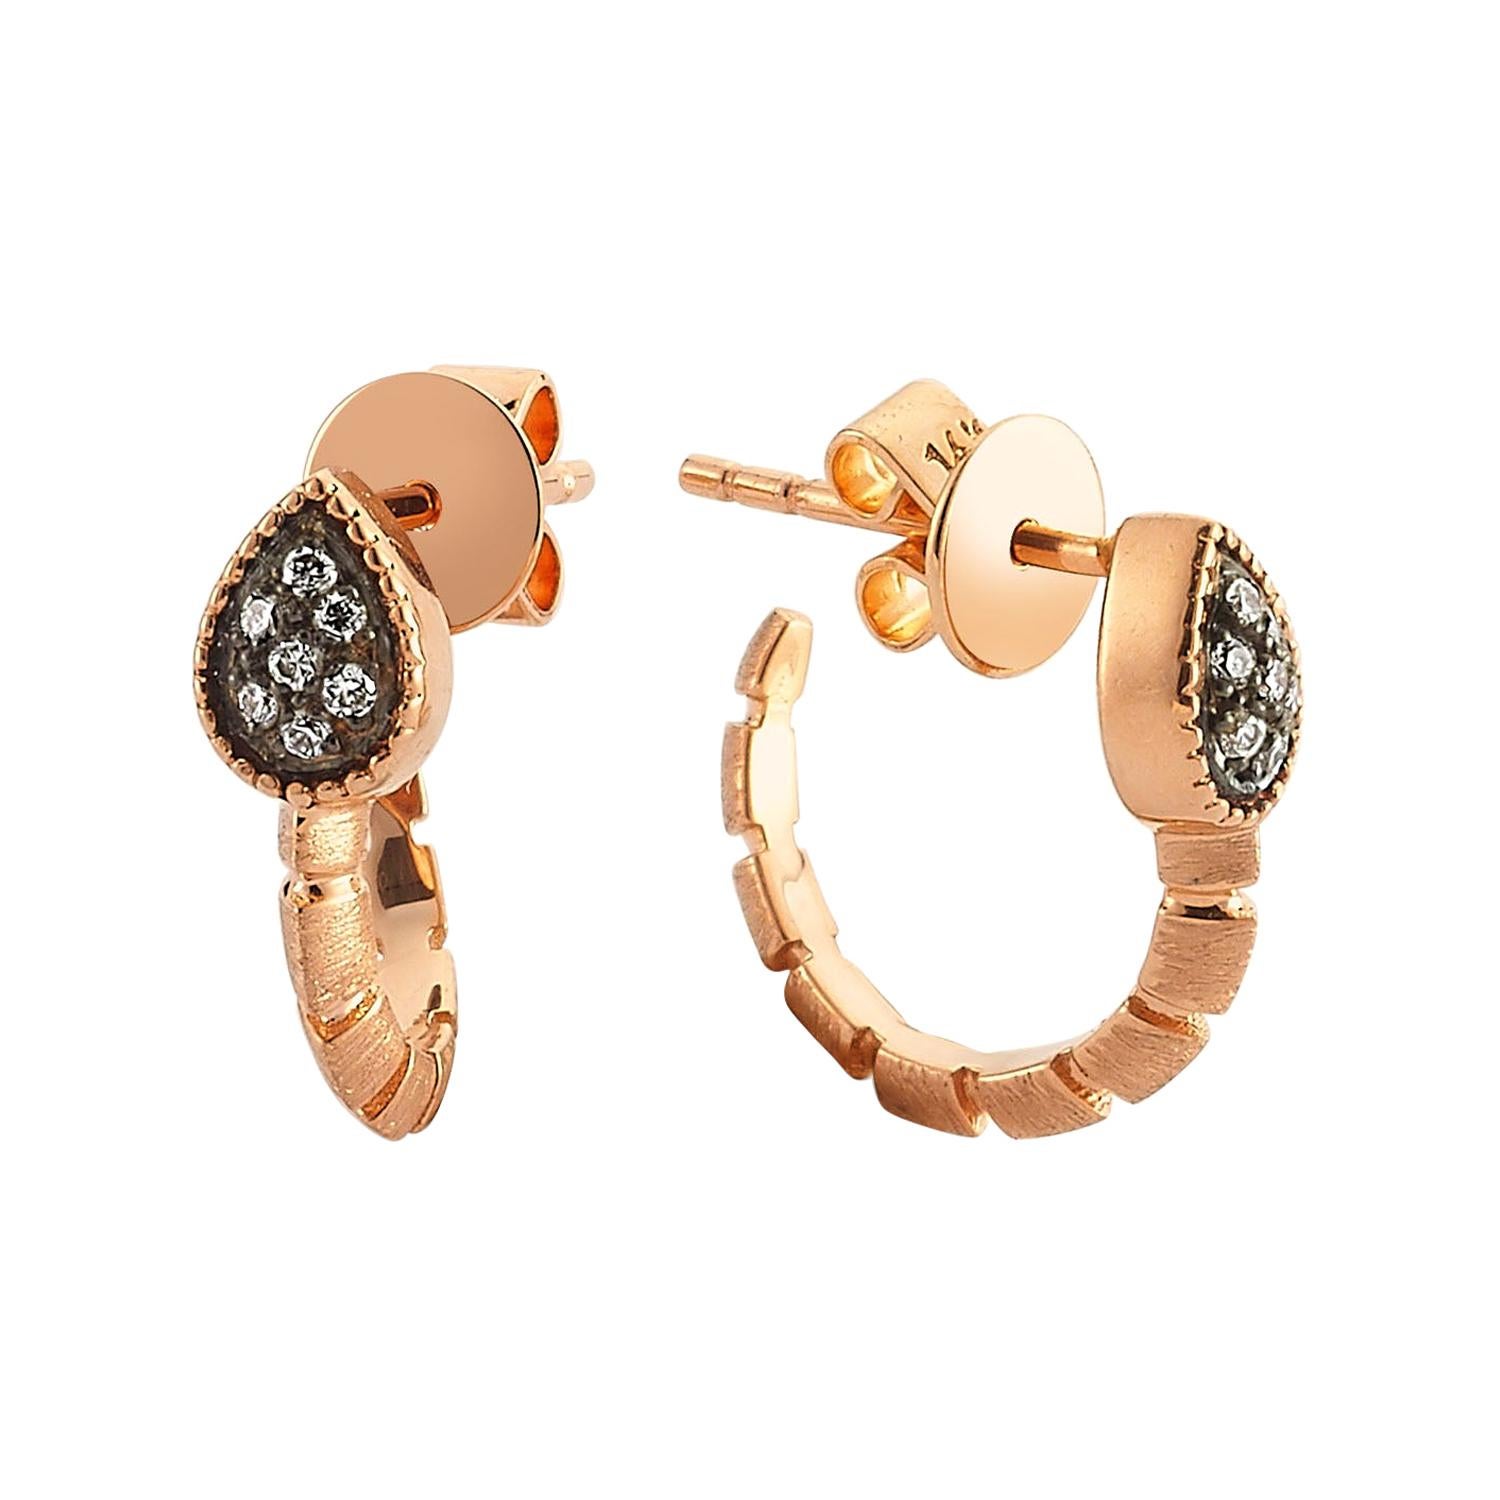 Baby Dragon Small Hoop Earrings in 14 Karat Rose Gold with White Diamond